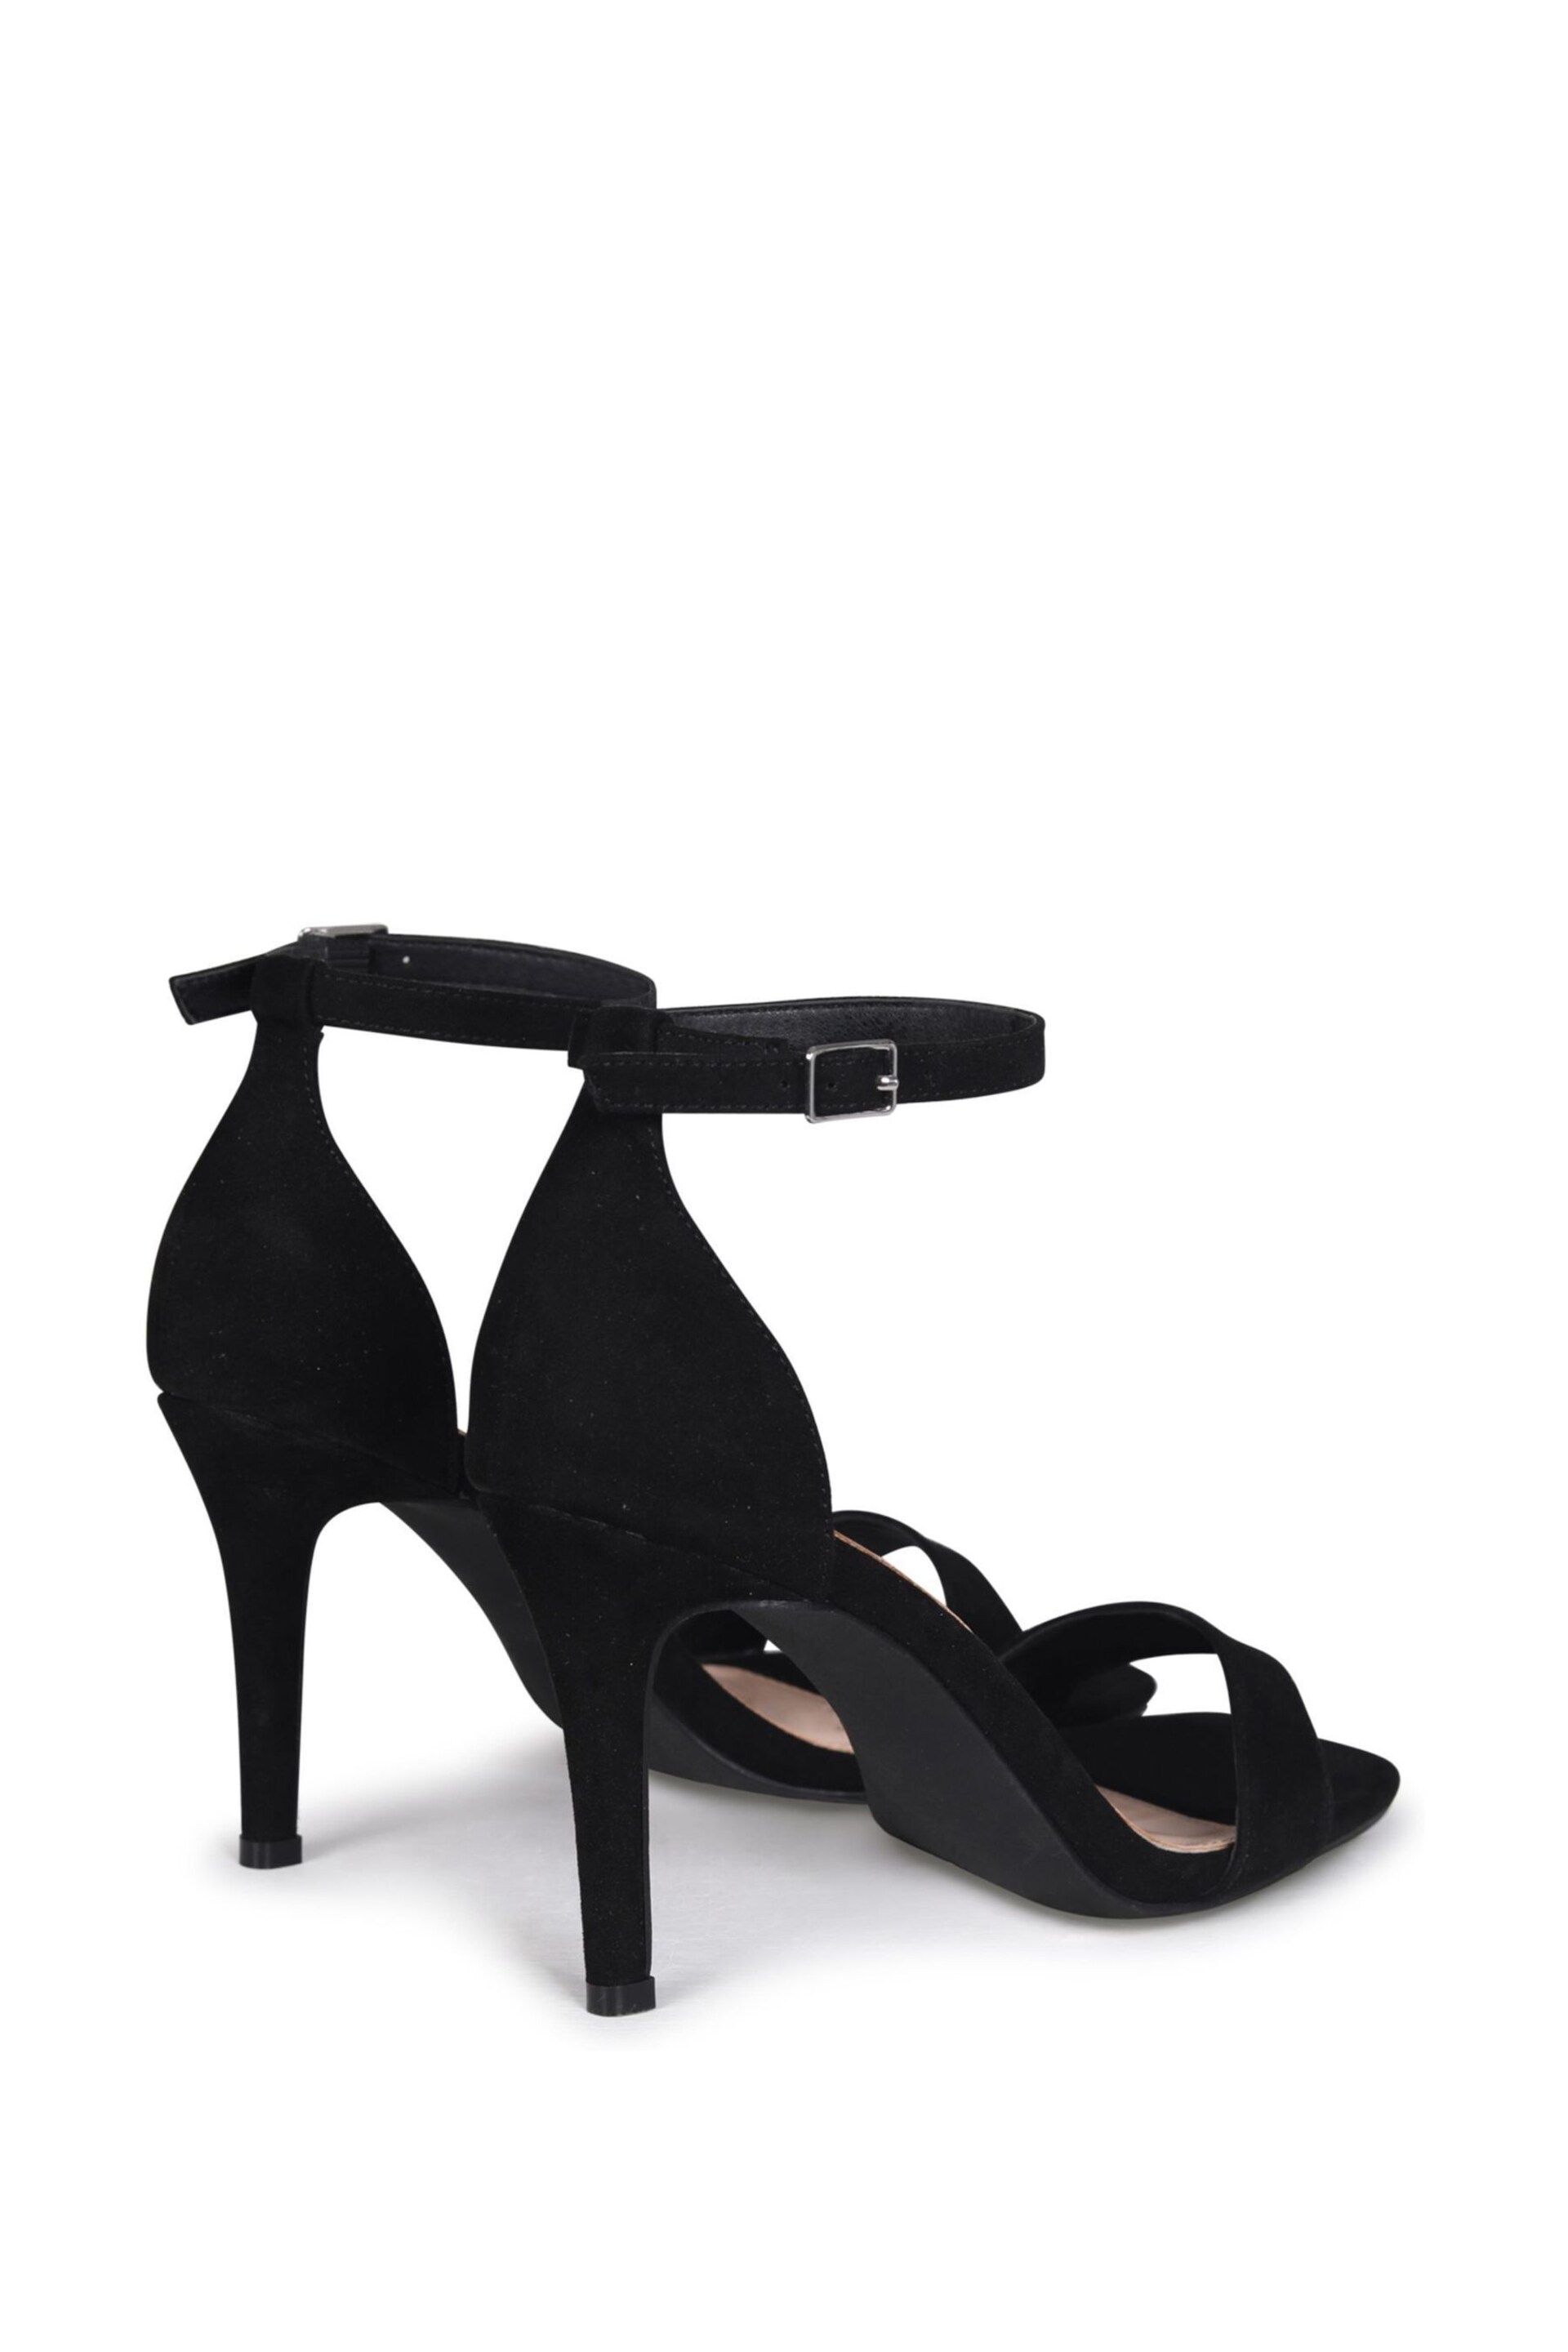 Linzi Black Faux Suede Kimmy Open Back Barely There Stiletto Sandal - Image 4 of 4